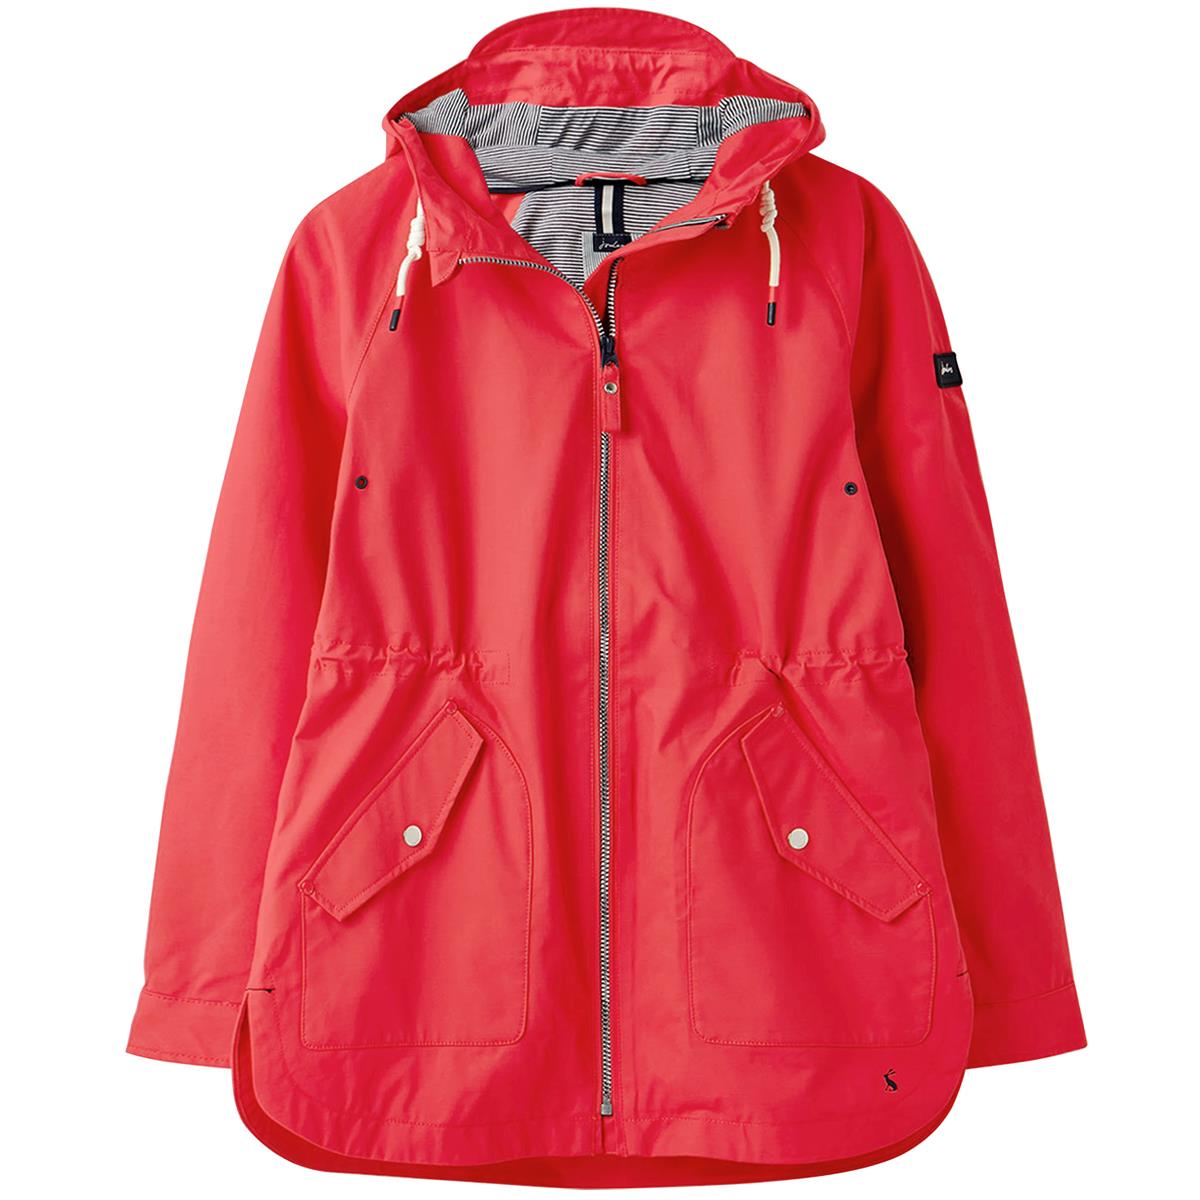 What are the extra features of the joules shoreside coastal waterproof jacket?